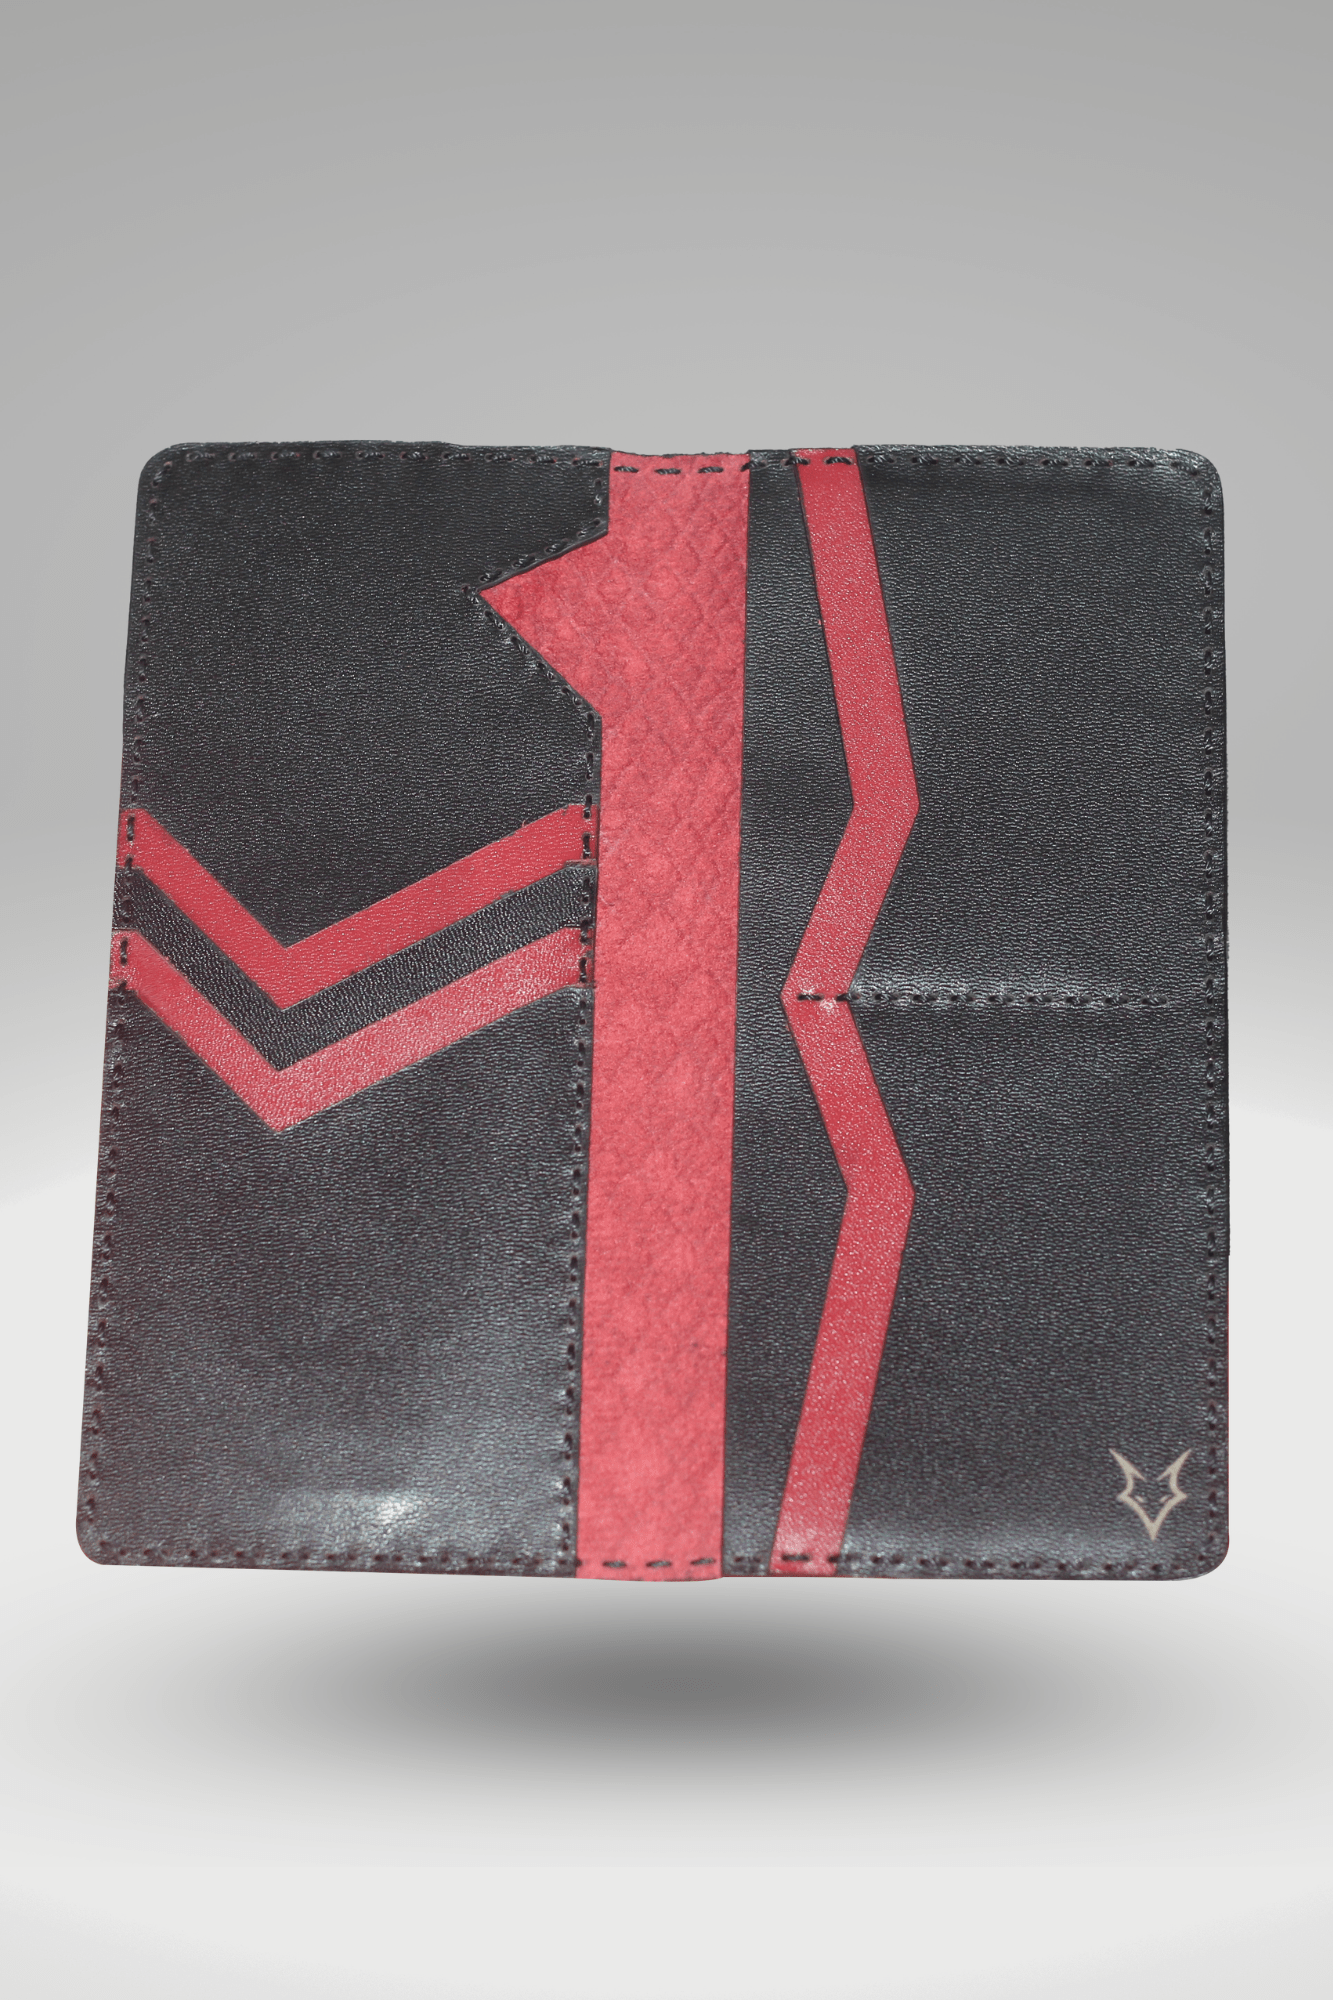 Unisex Genuine Leather Wallet With Perforated Red & Black Camouflage Textured Finish